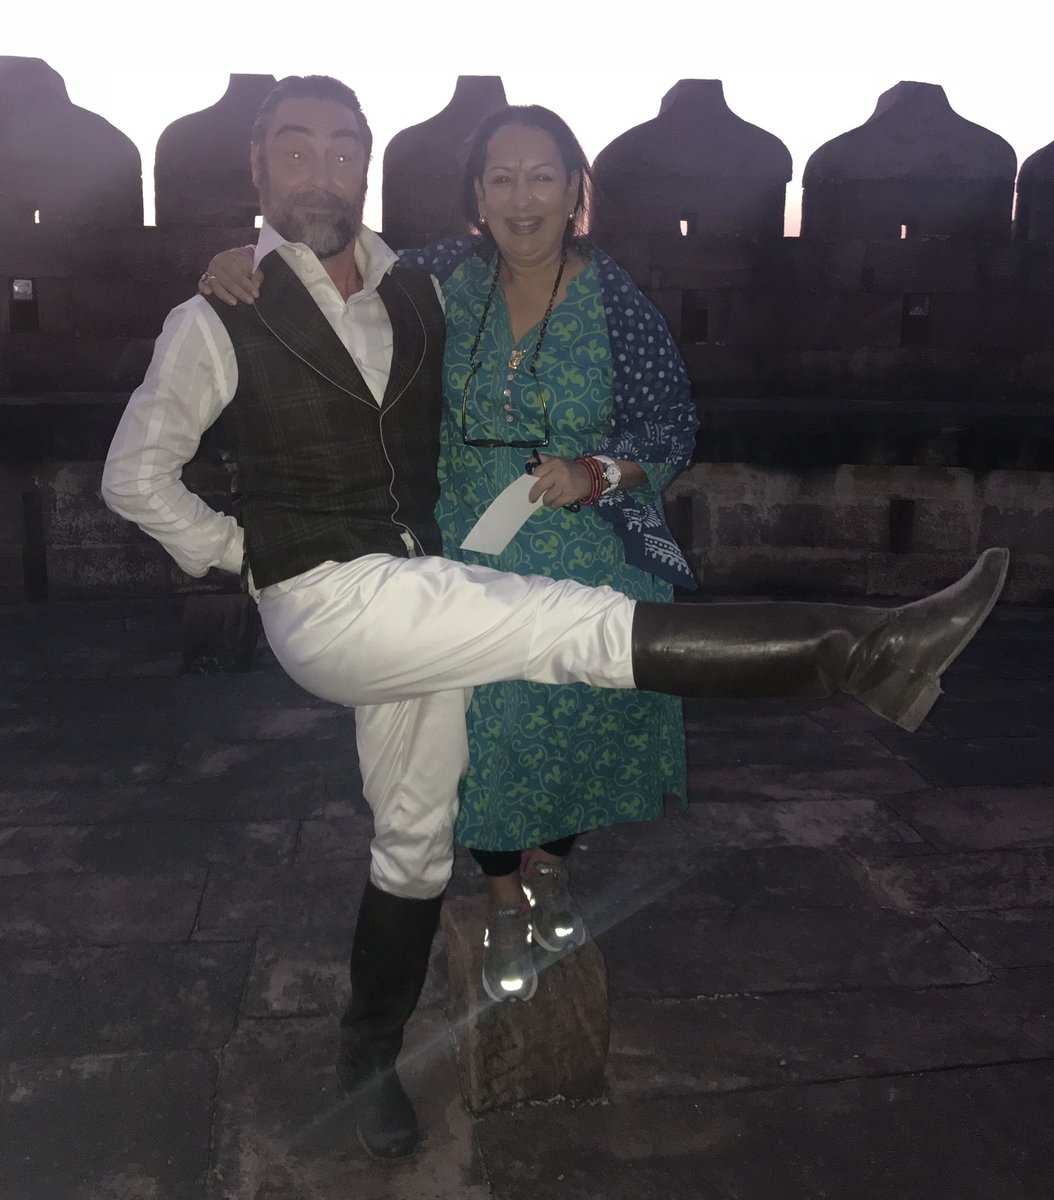 #throwback to some fun times with the always entertaining #NathanielParker while filming for Warrior Queen of Jhansi. 

#director #writer #producer #releasingfall2019 #warriorqueenofjhansi #filming